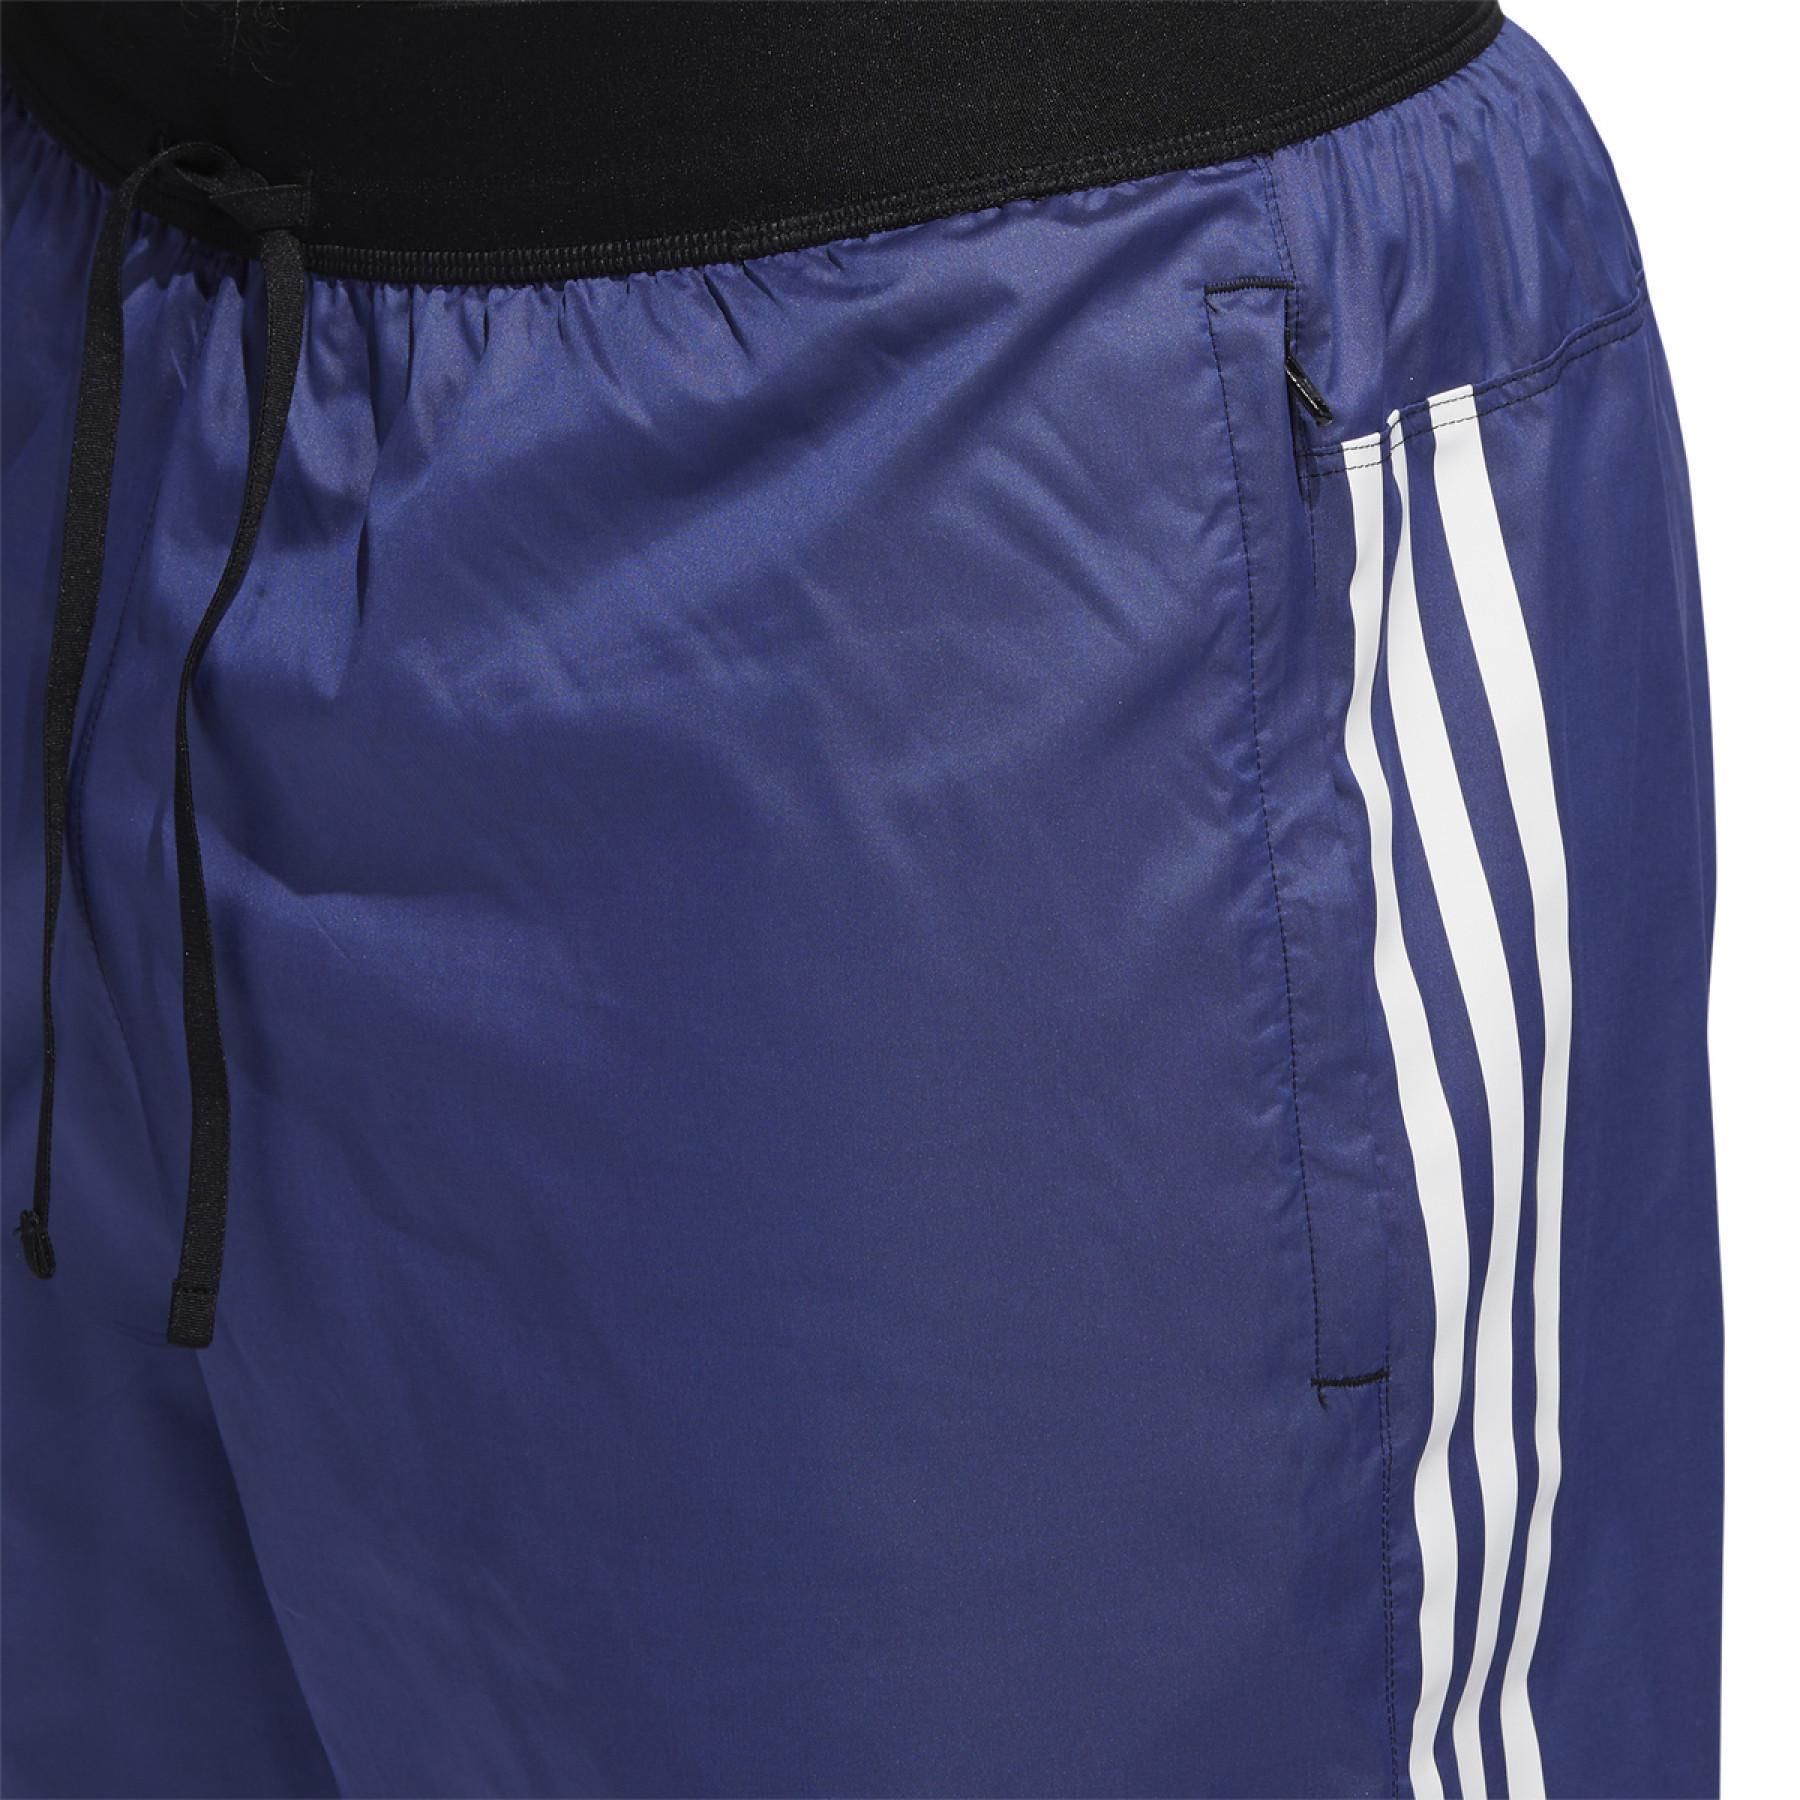 Short adidas For The Oceans Primeblue 6-Inch